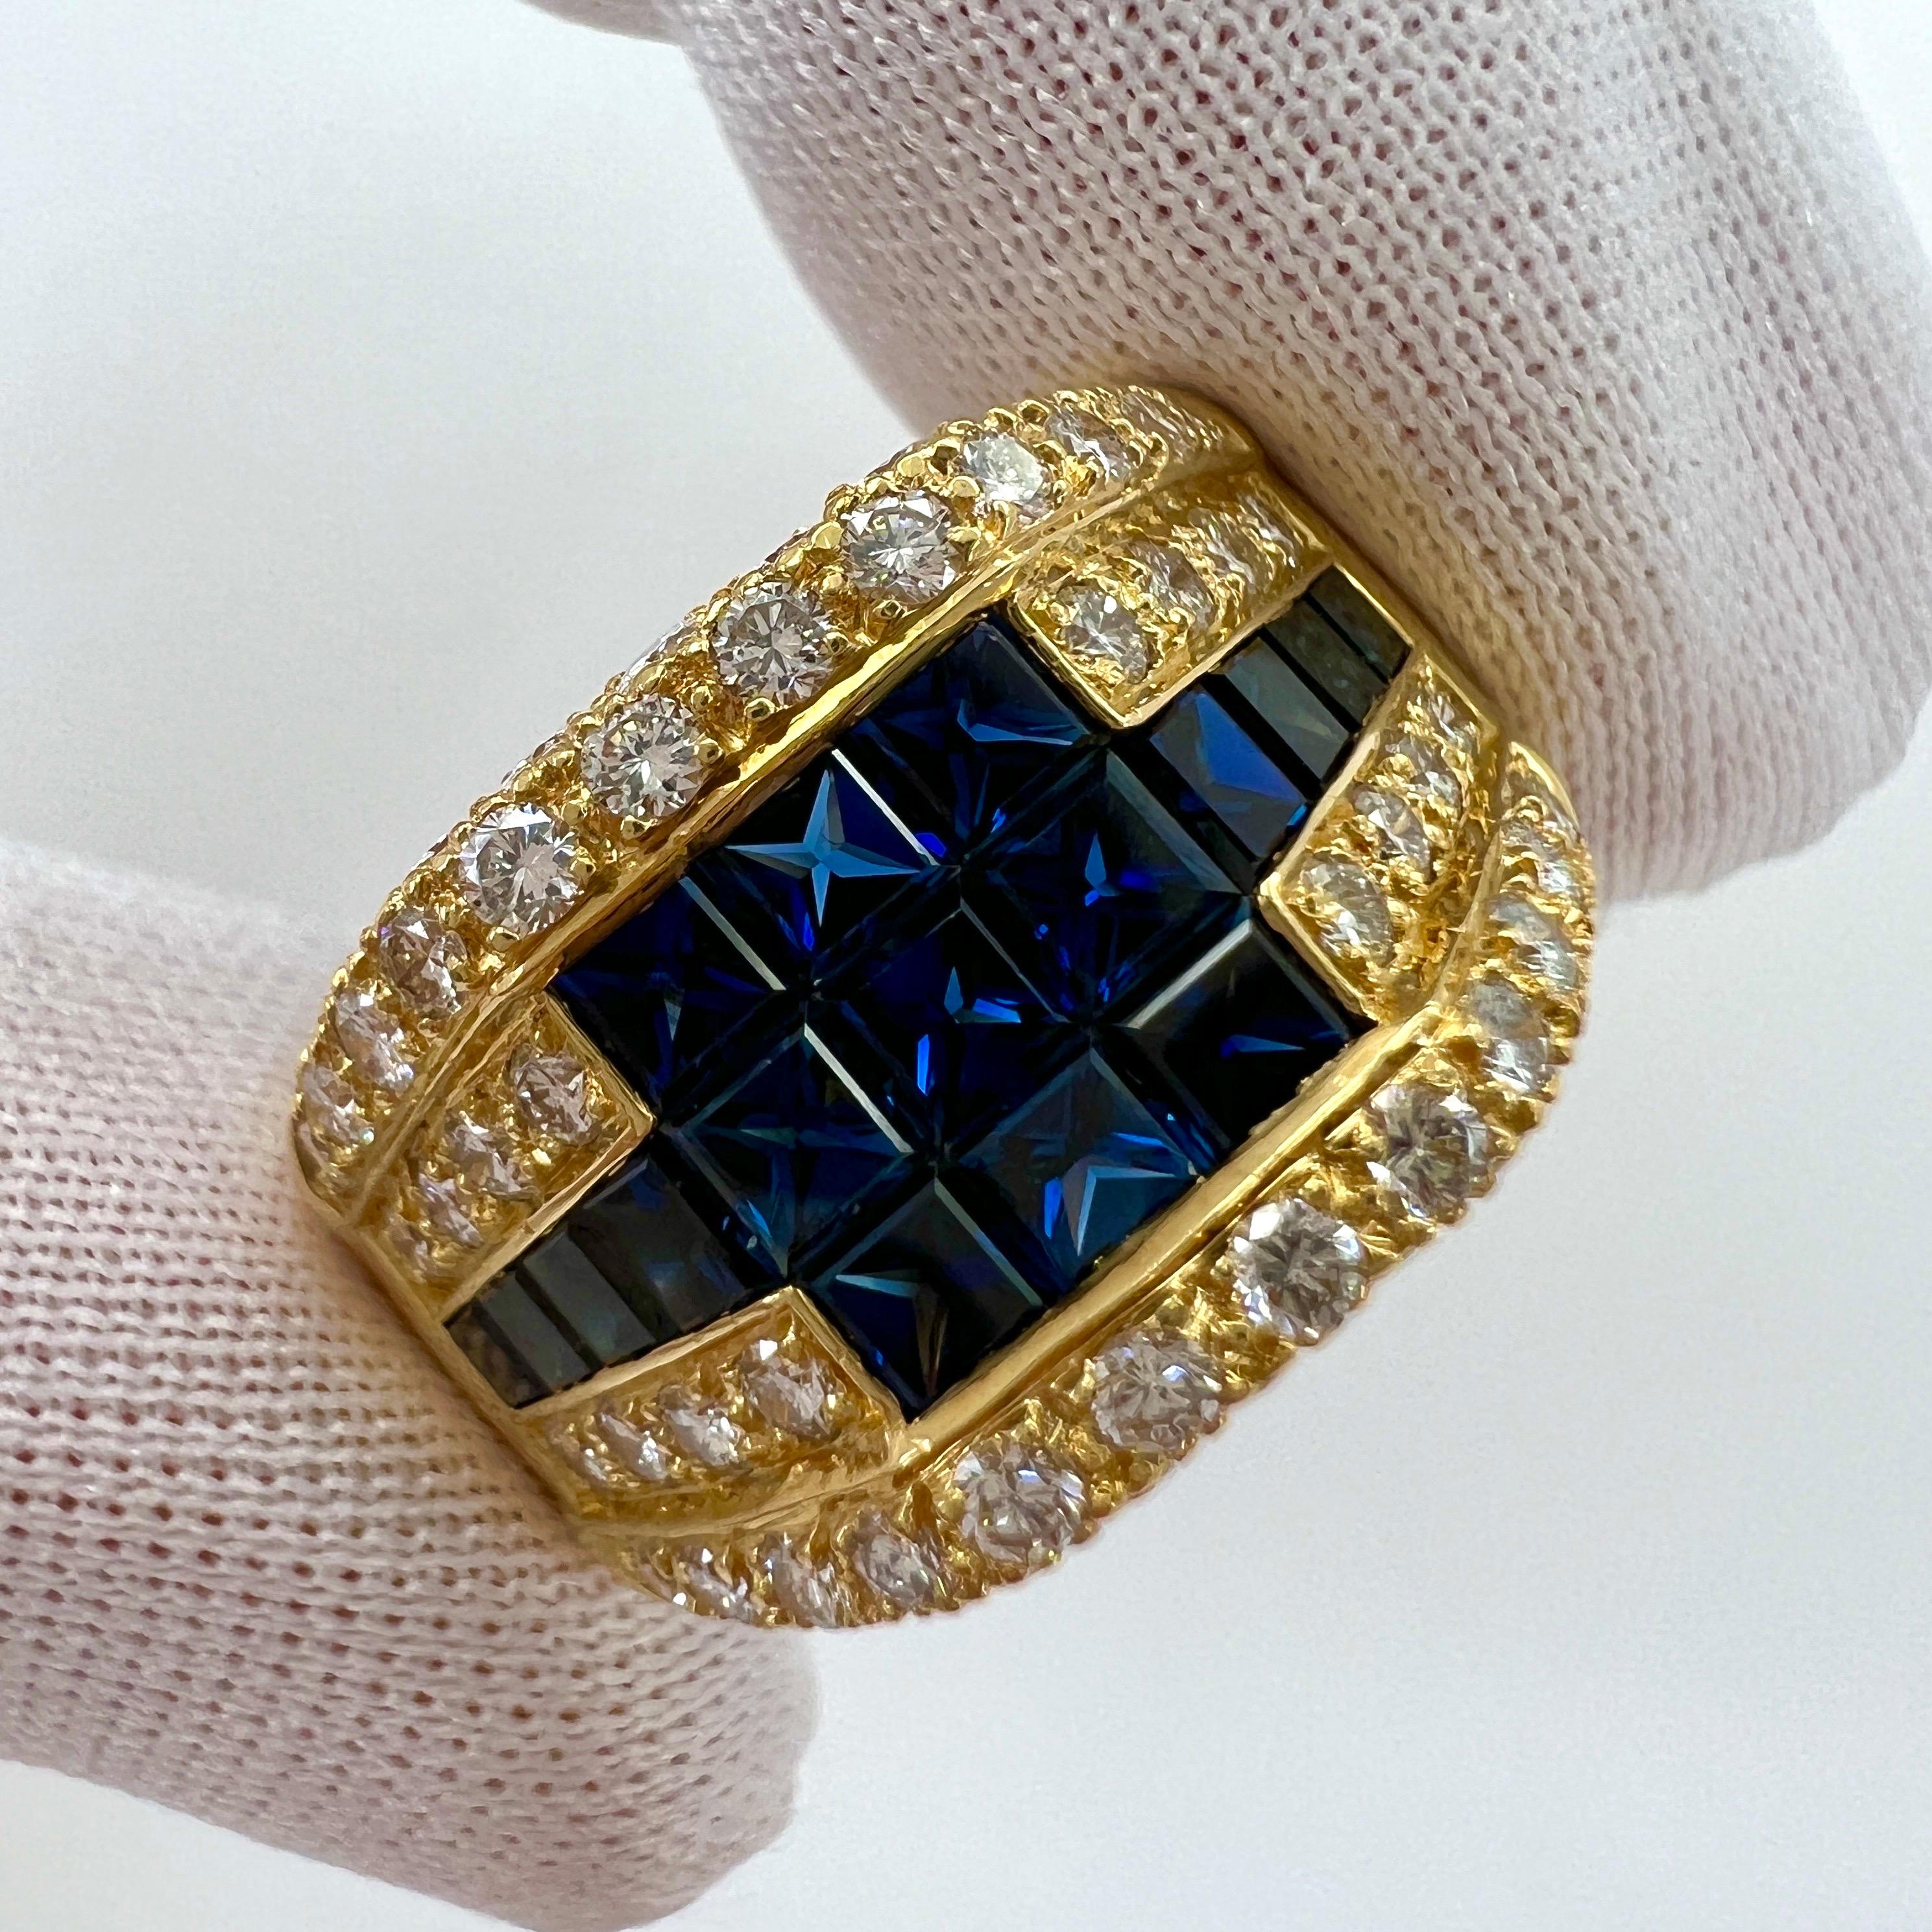 Fine Vintage French Made Blue Sapphire & Diamond Mystery Set 18k Yellow Gold Ring.

A stunning and impressive vintage sapphire and diamond ring with mystery set sapphires (a style of setting first developed by French fine jewellery house Van Cleef